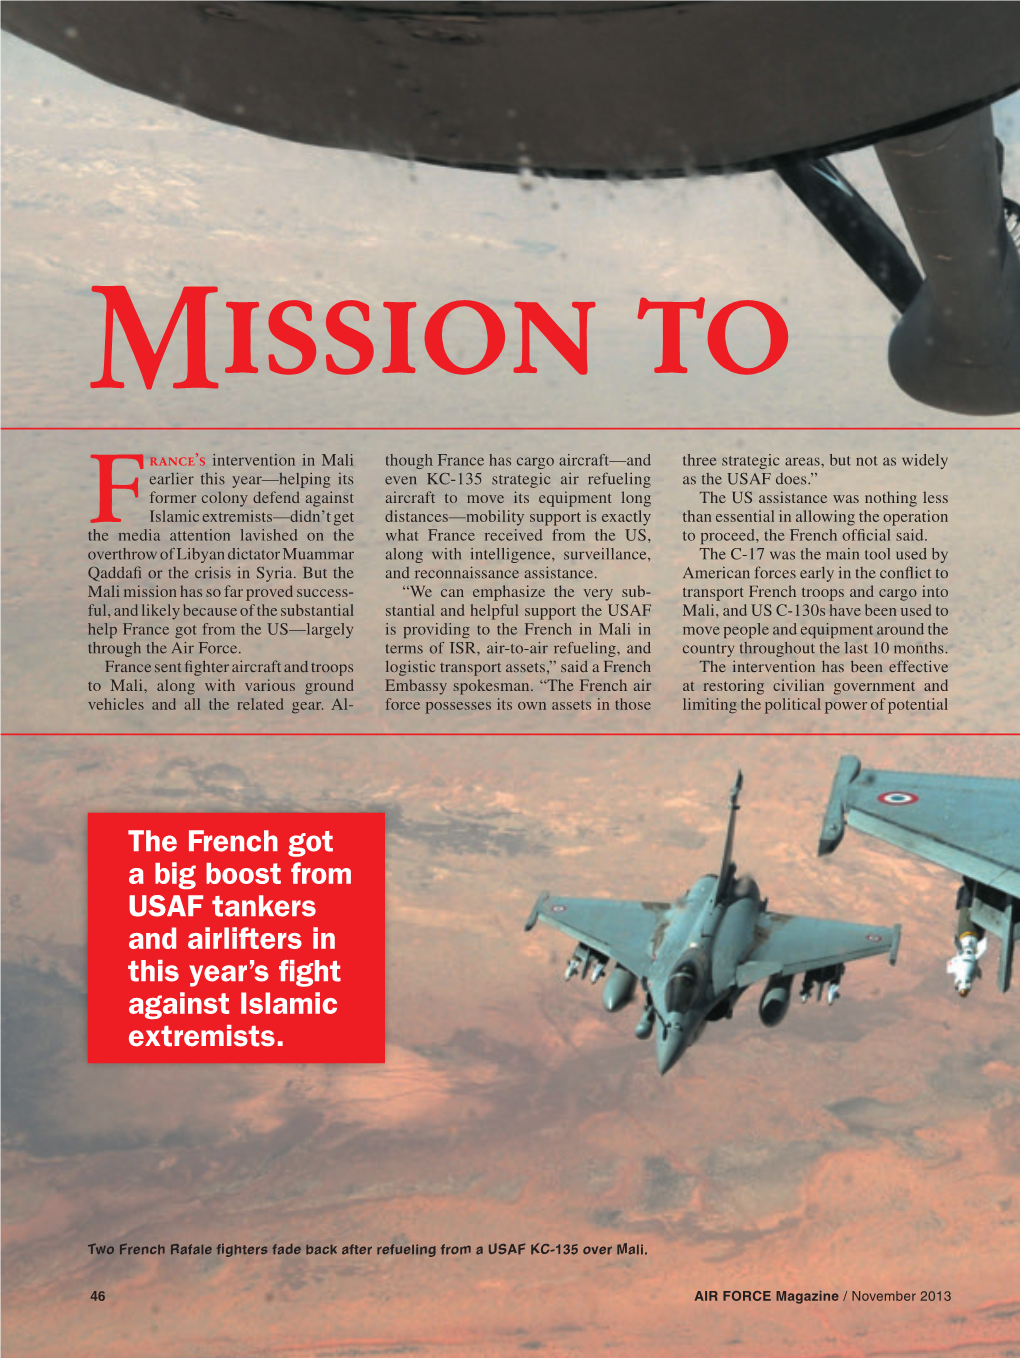 France's Intervention in Mali